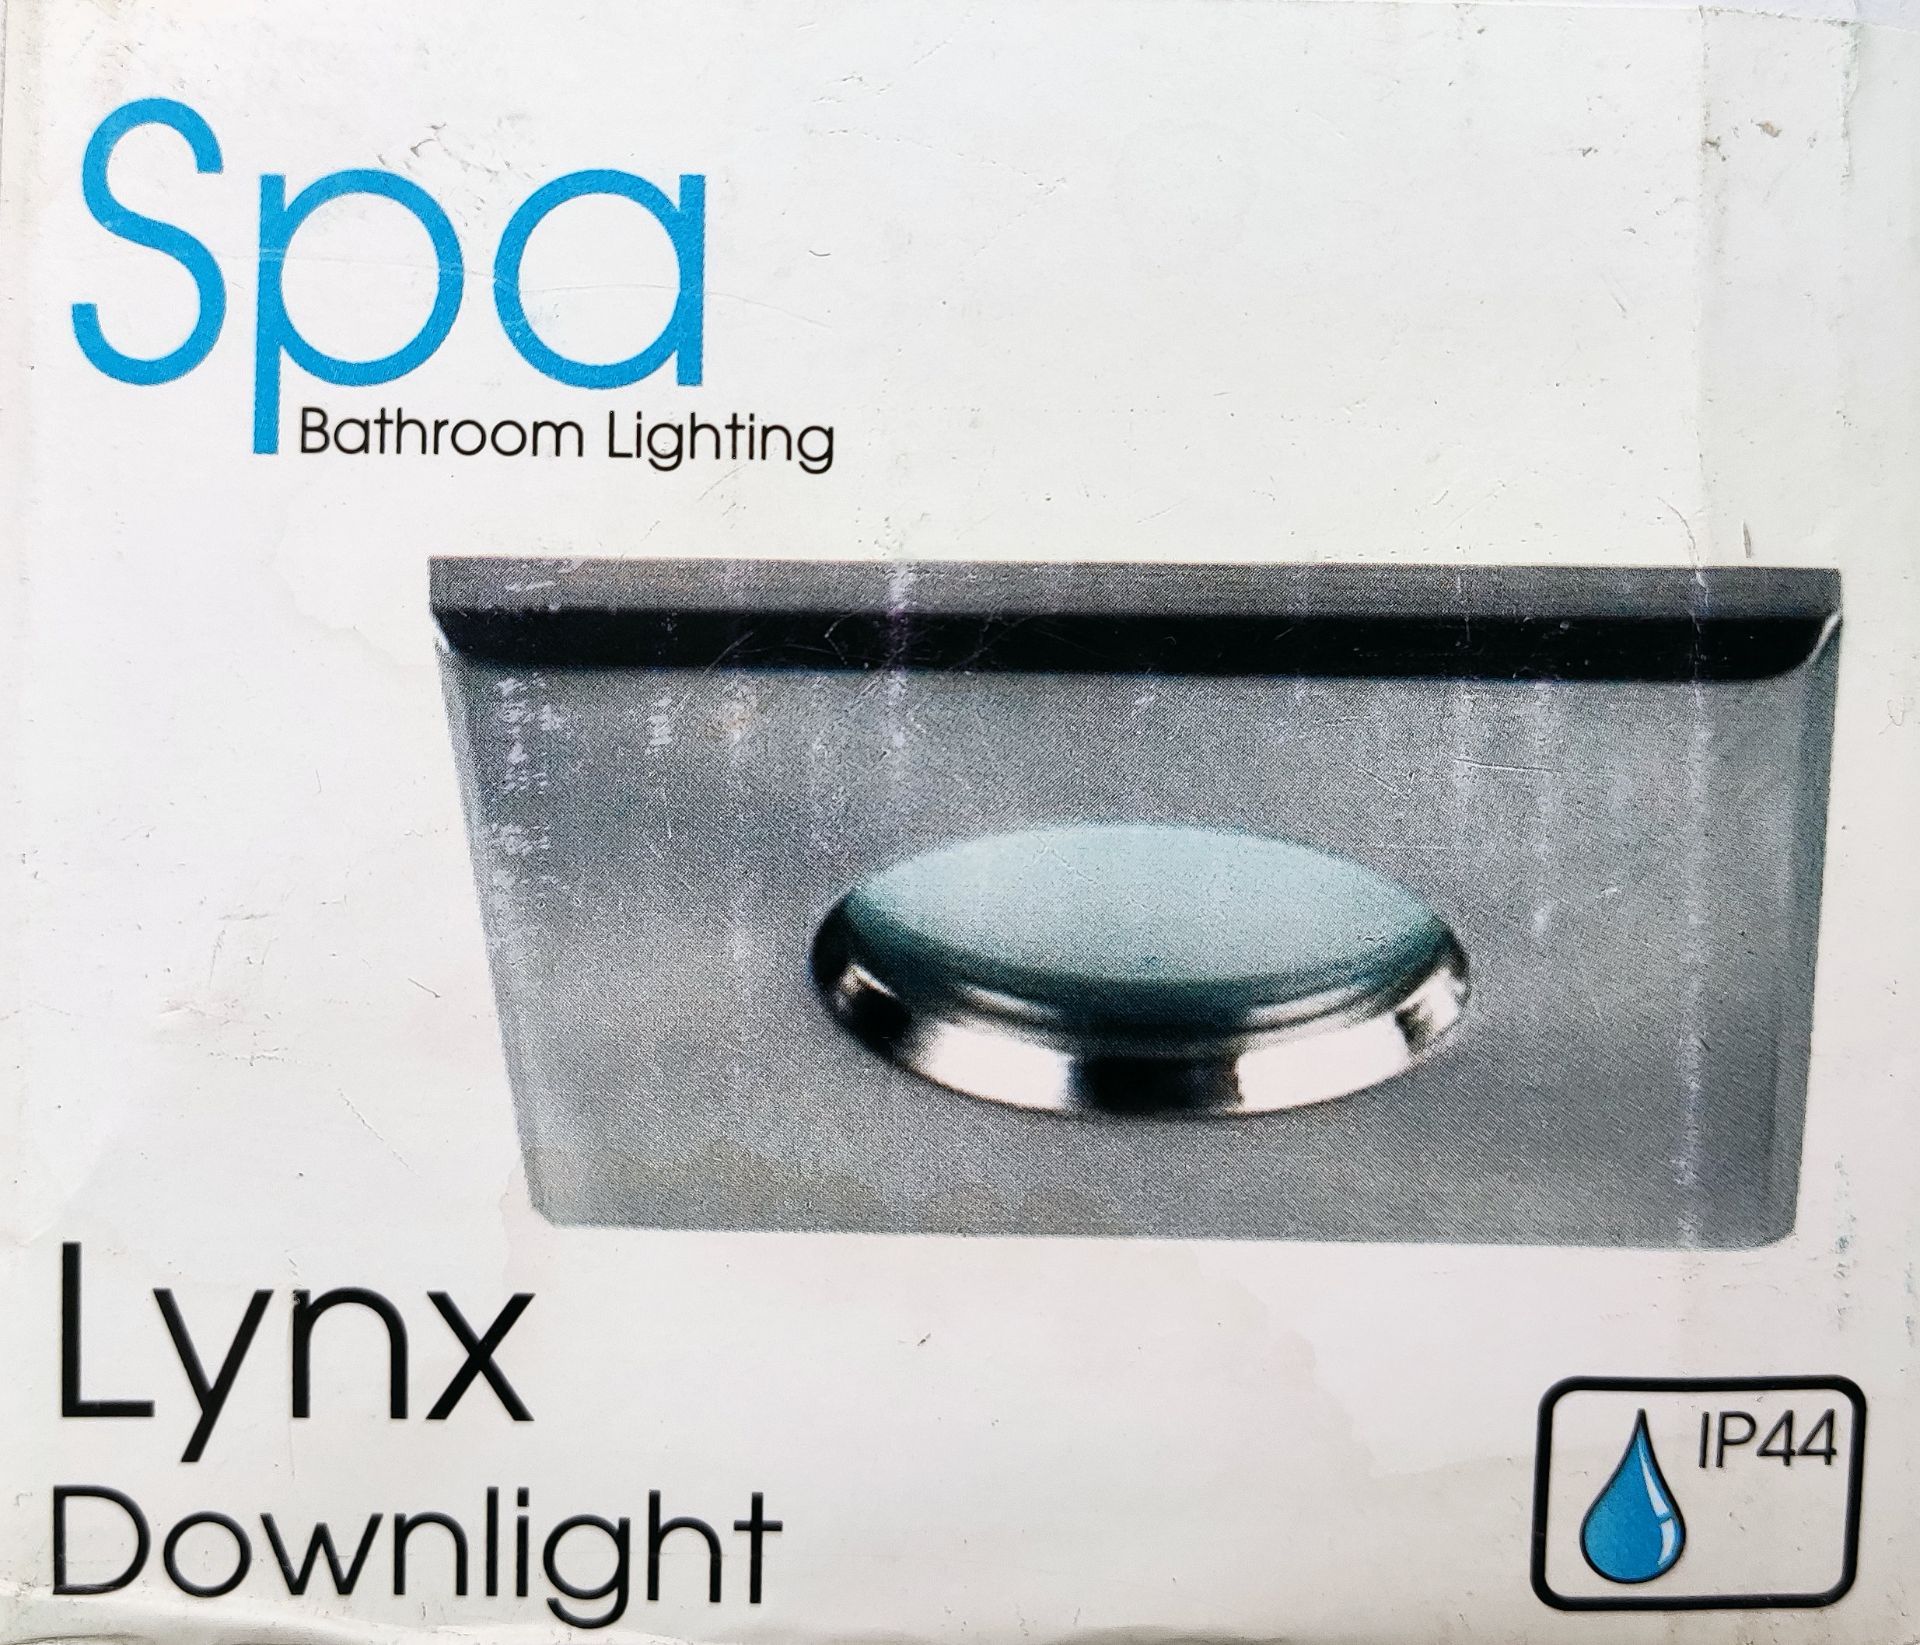 4 x Searchlight Spa Bathroom Lighting Lynx Downlight - IP44 Rated - New Boxed Stock - CL323 - Ref: 1